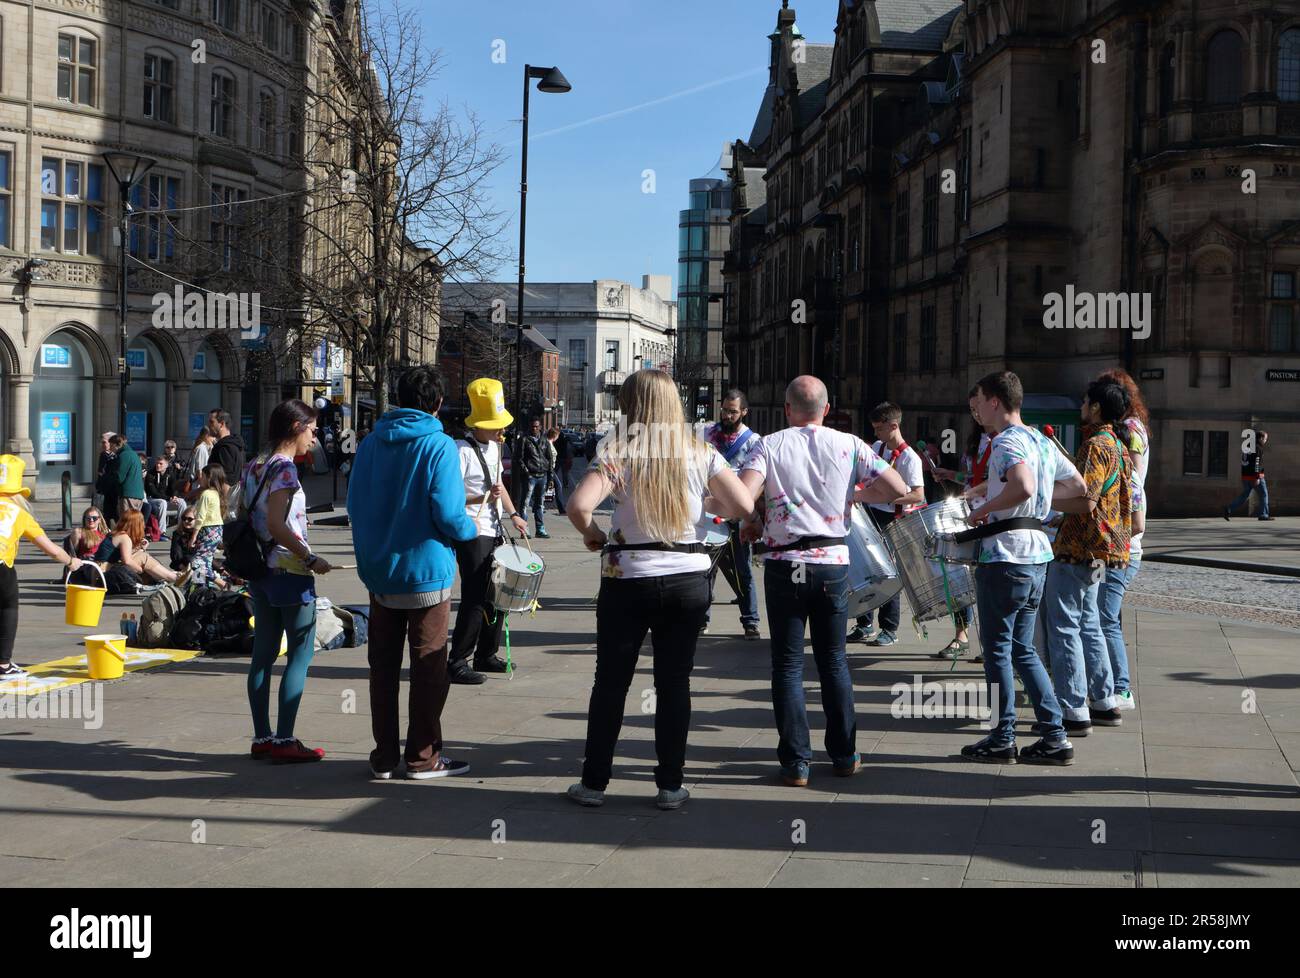 Group of people drumming in Sheffield city centre England, street entertainment Stock Photo